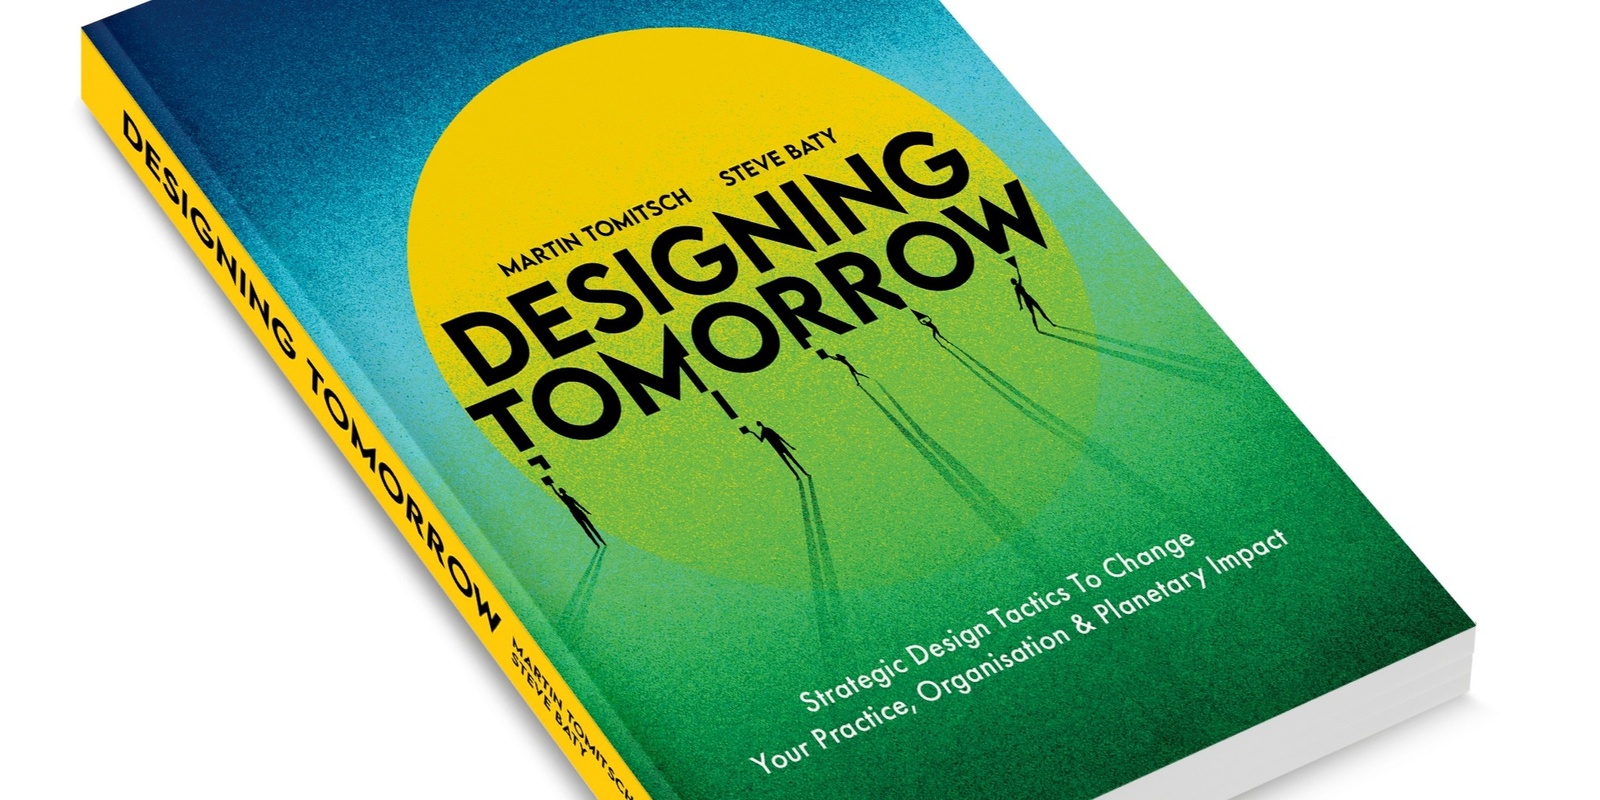 Banner image for Designing Tomorrow Book Launch at Meld Studios